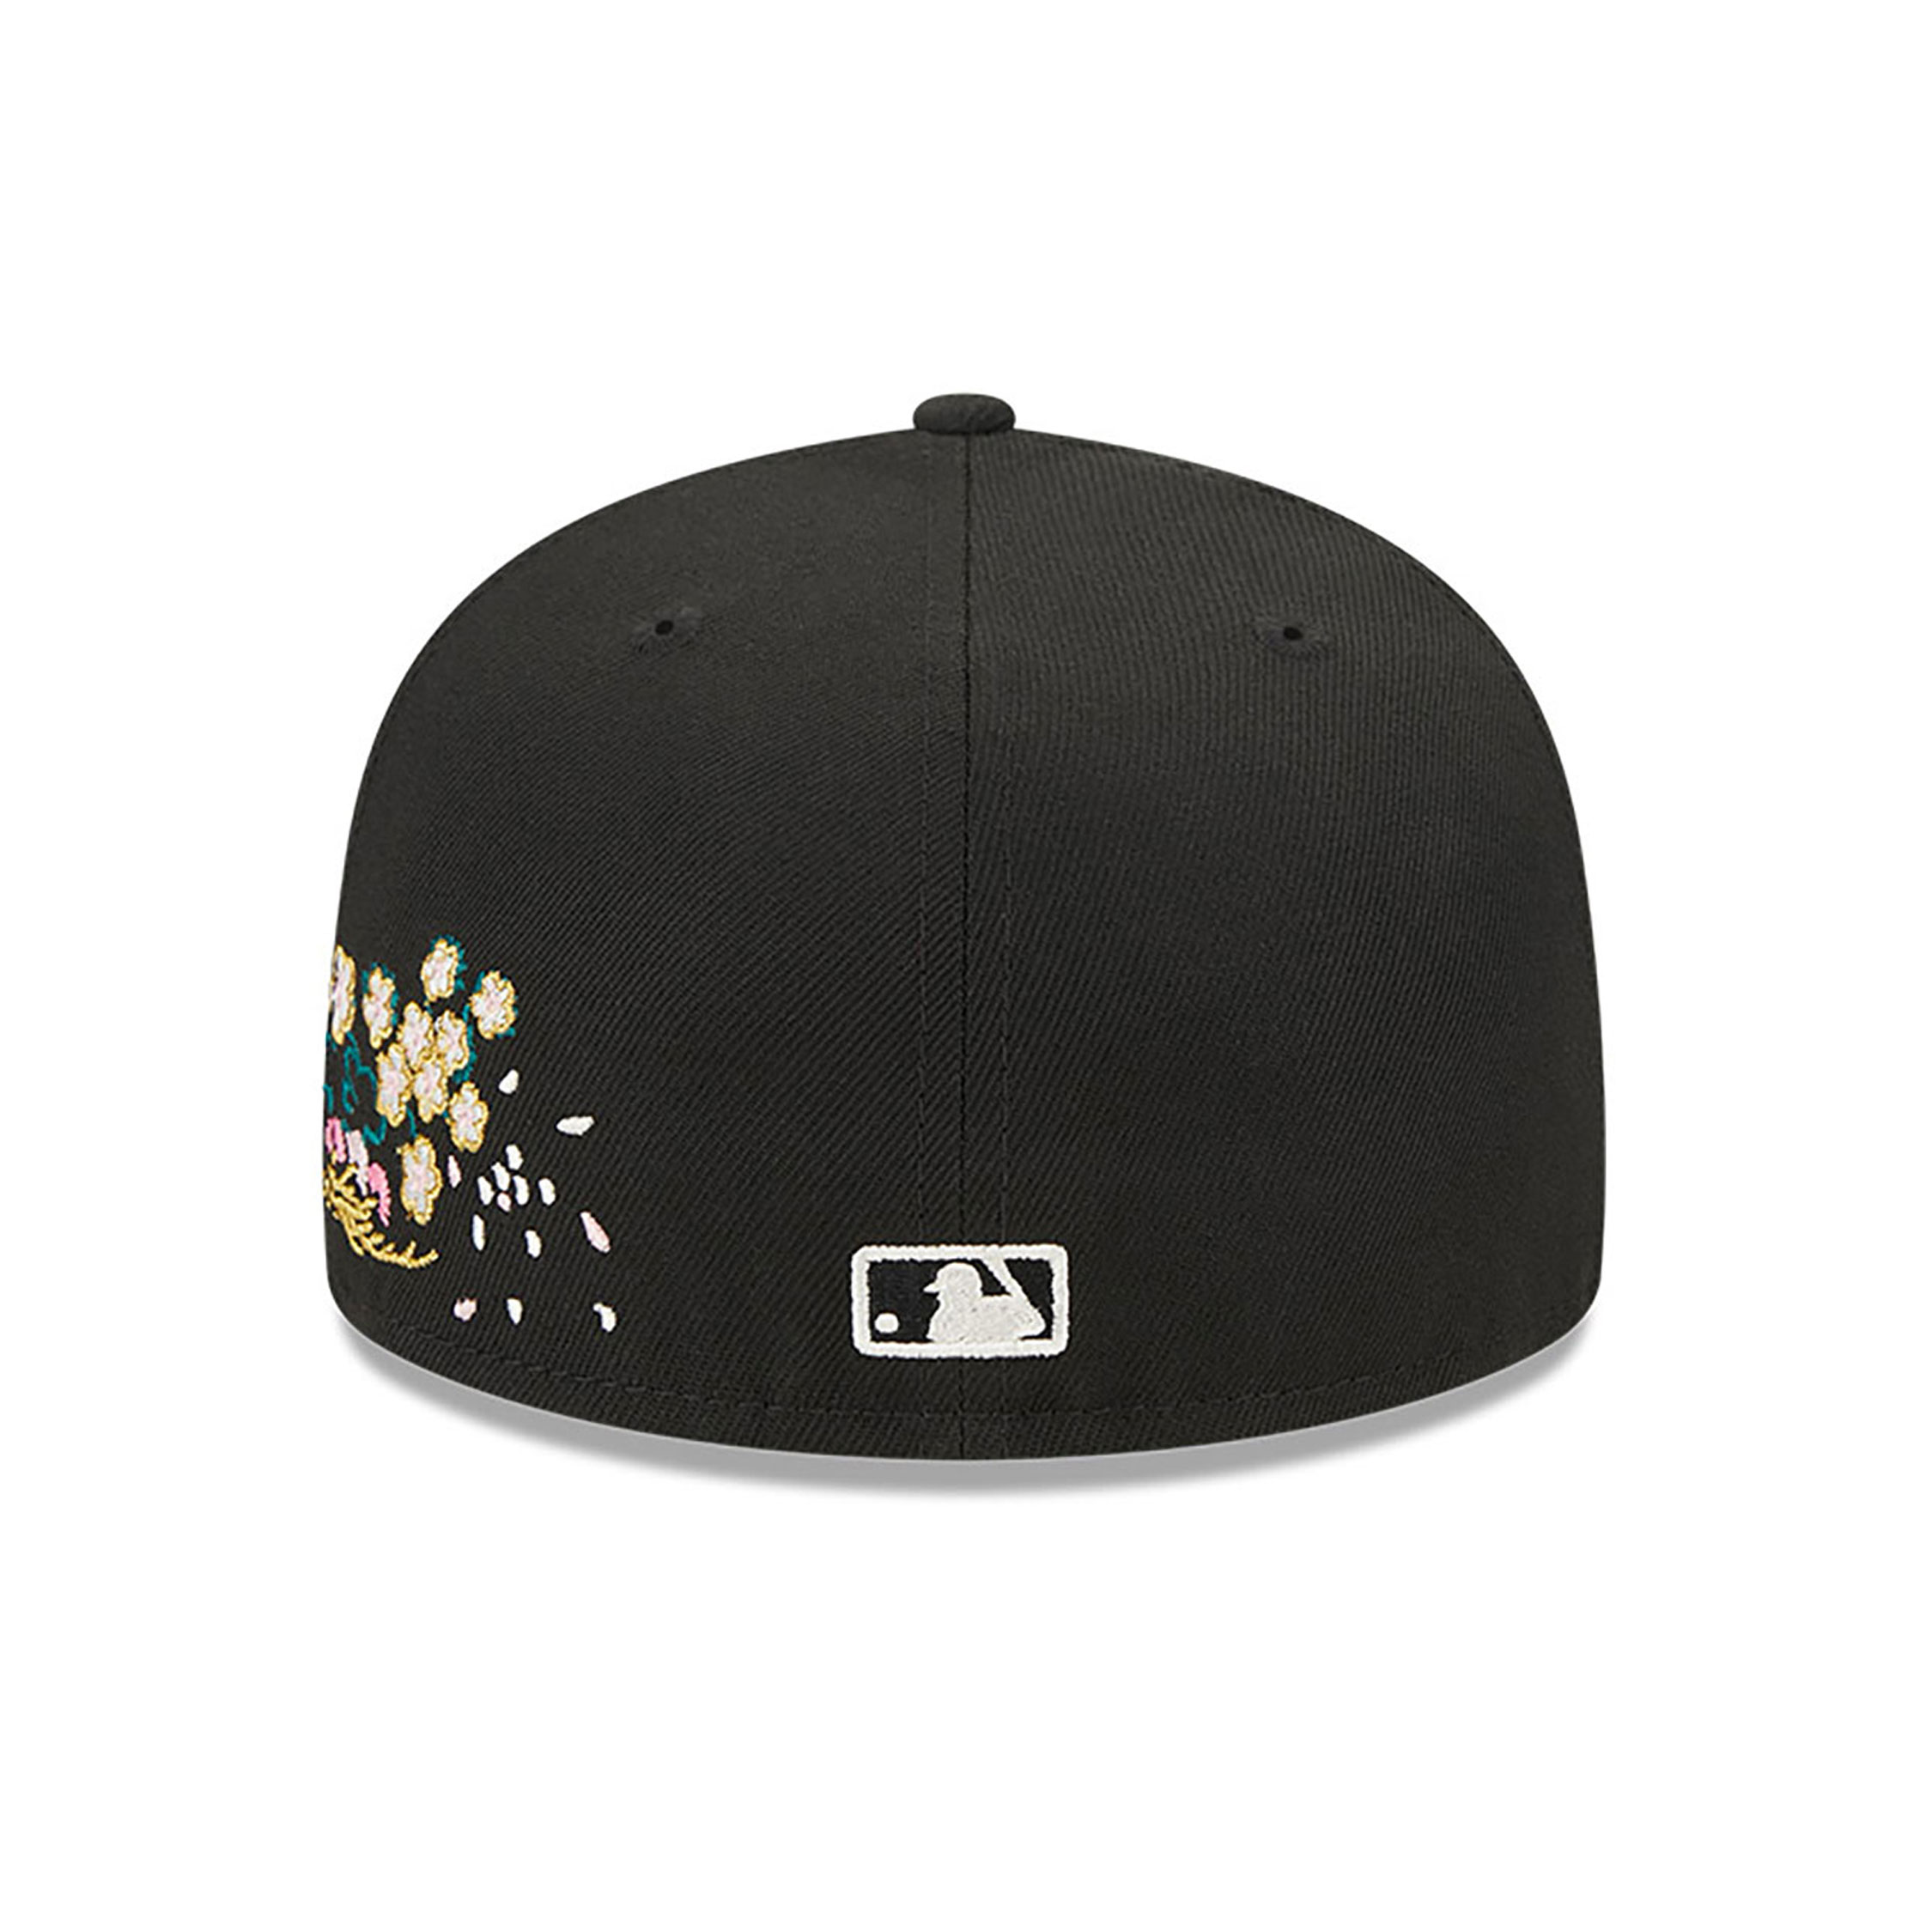 San Francisco Giants Cherry Blossom Black 59FIFTY Fitted Cap